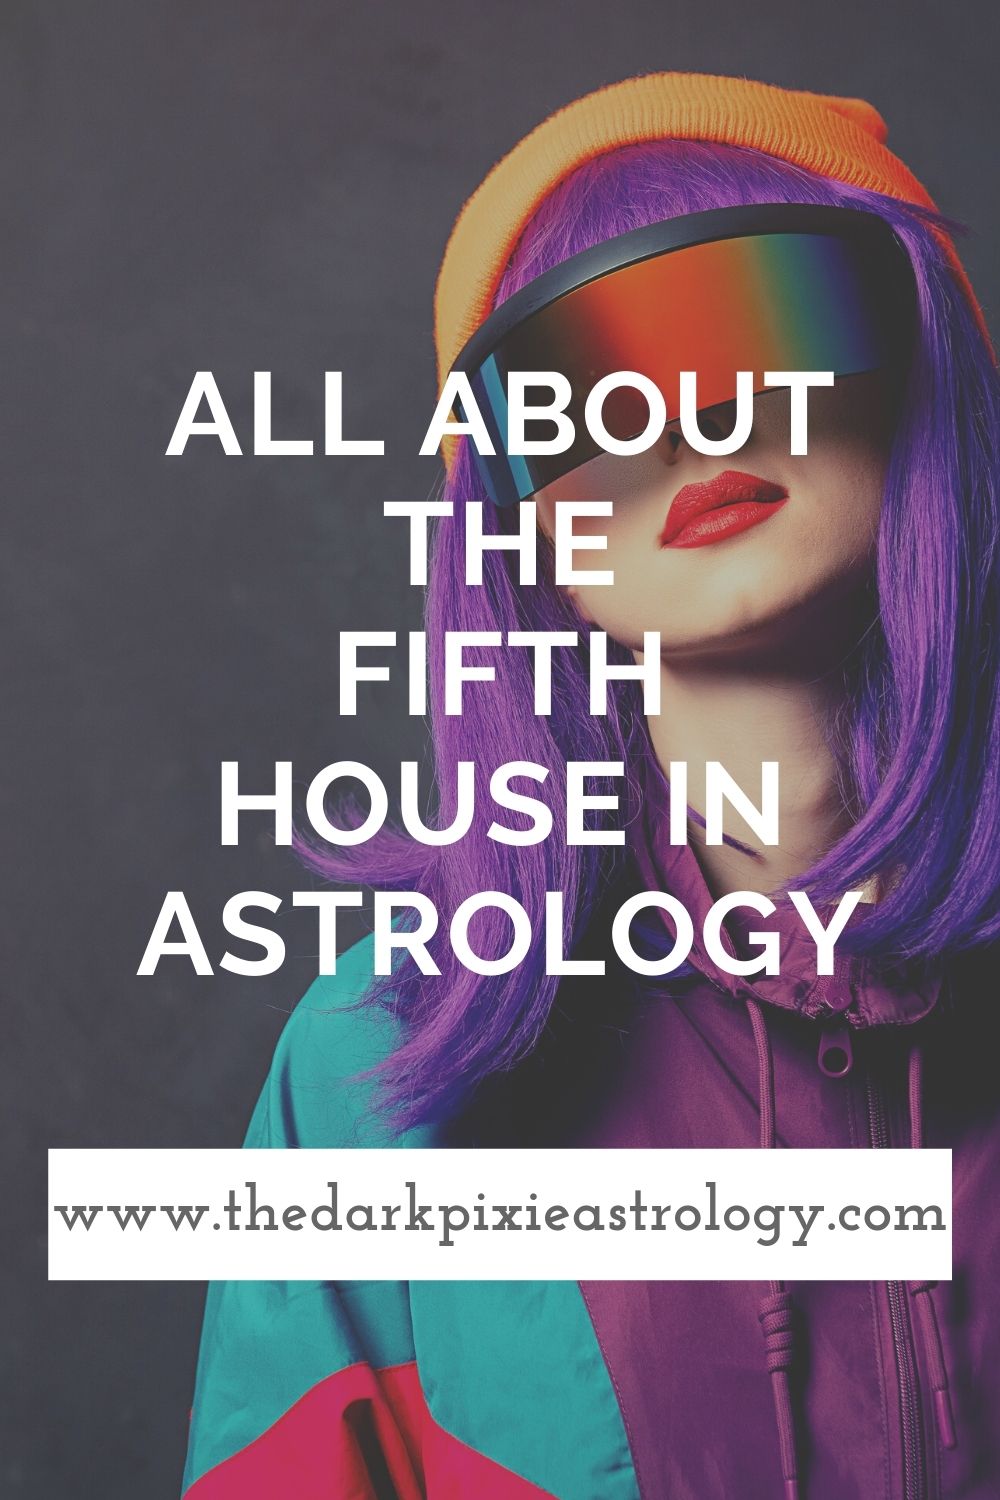 5th and 7th house in astrology how to find